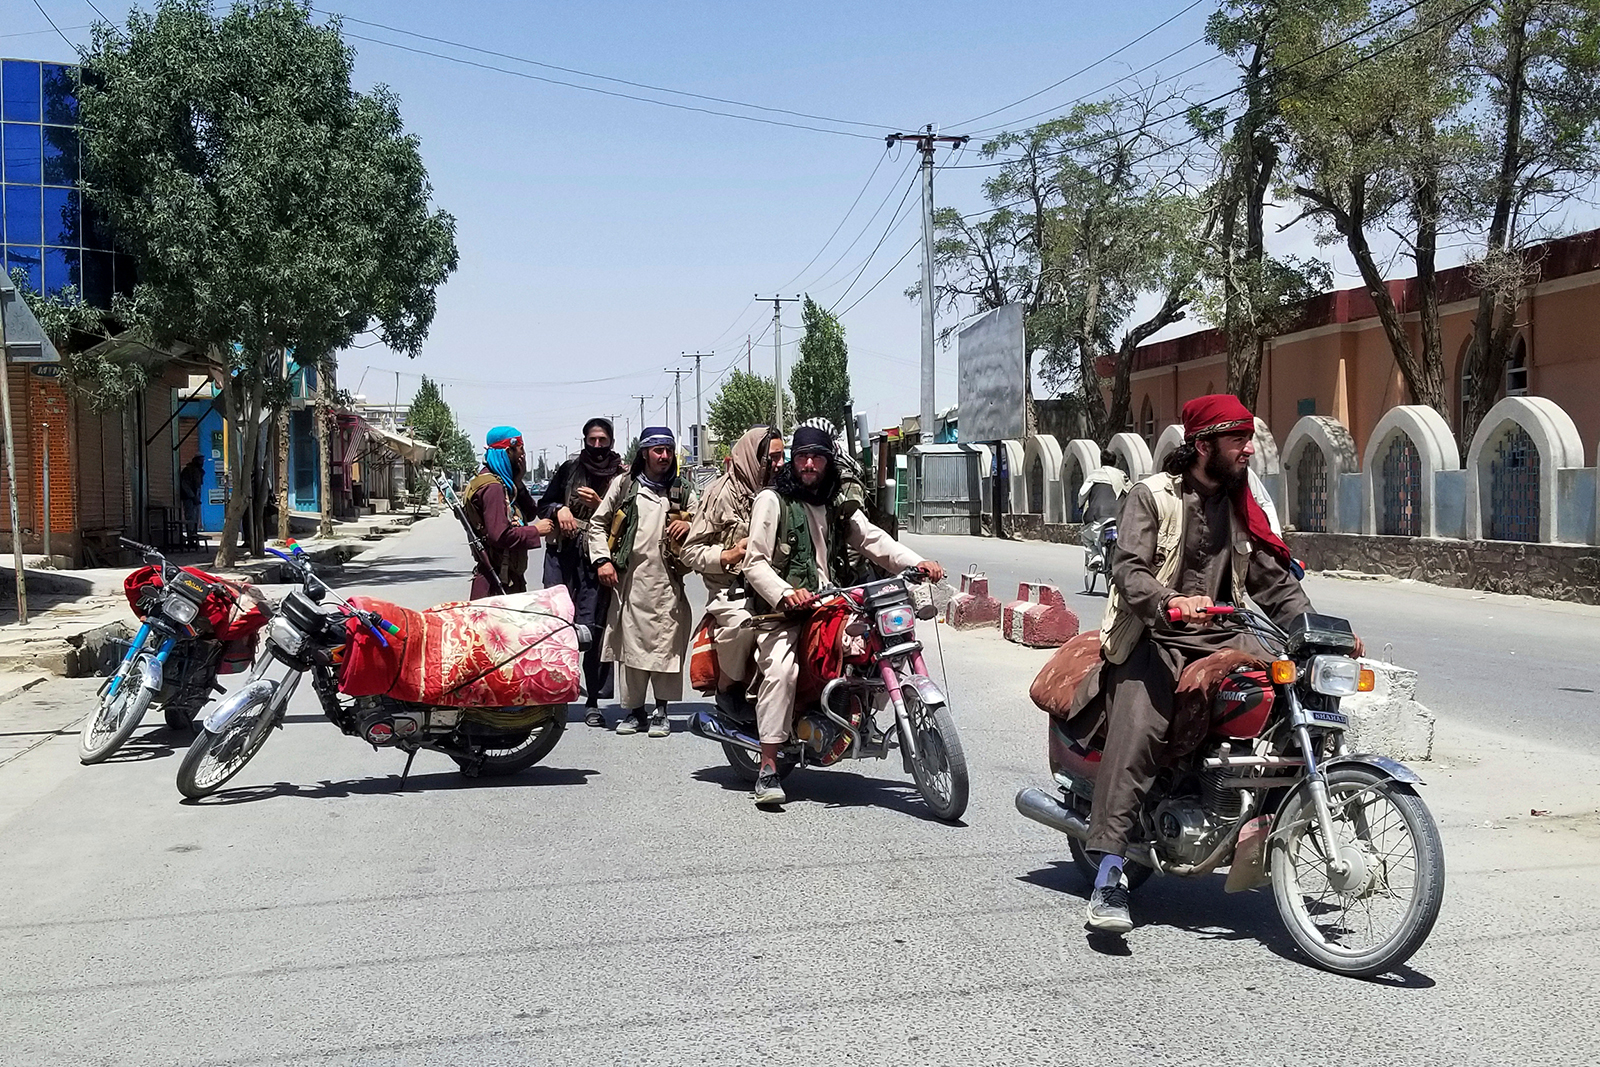 Taliban fighters patrol inside the city of Ghazni, southwest of Kabul, on Thursday.